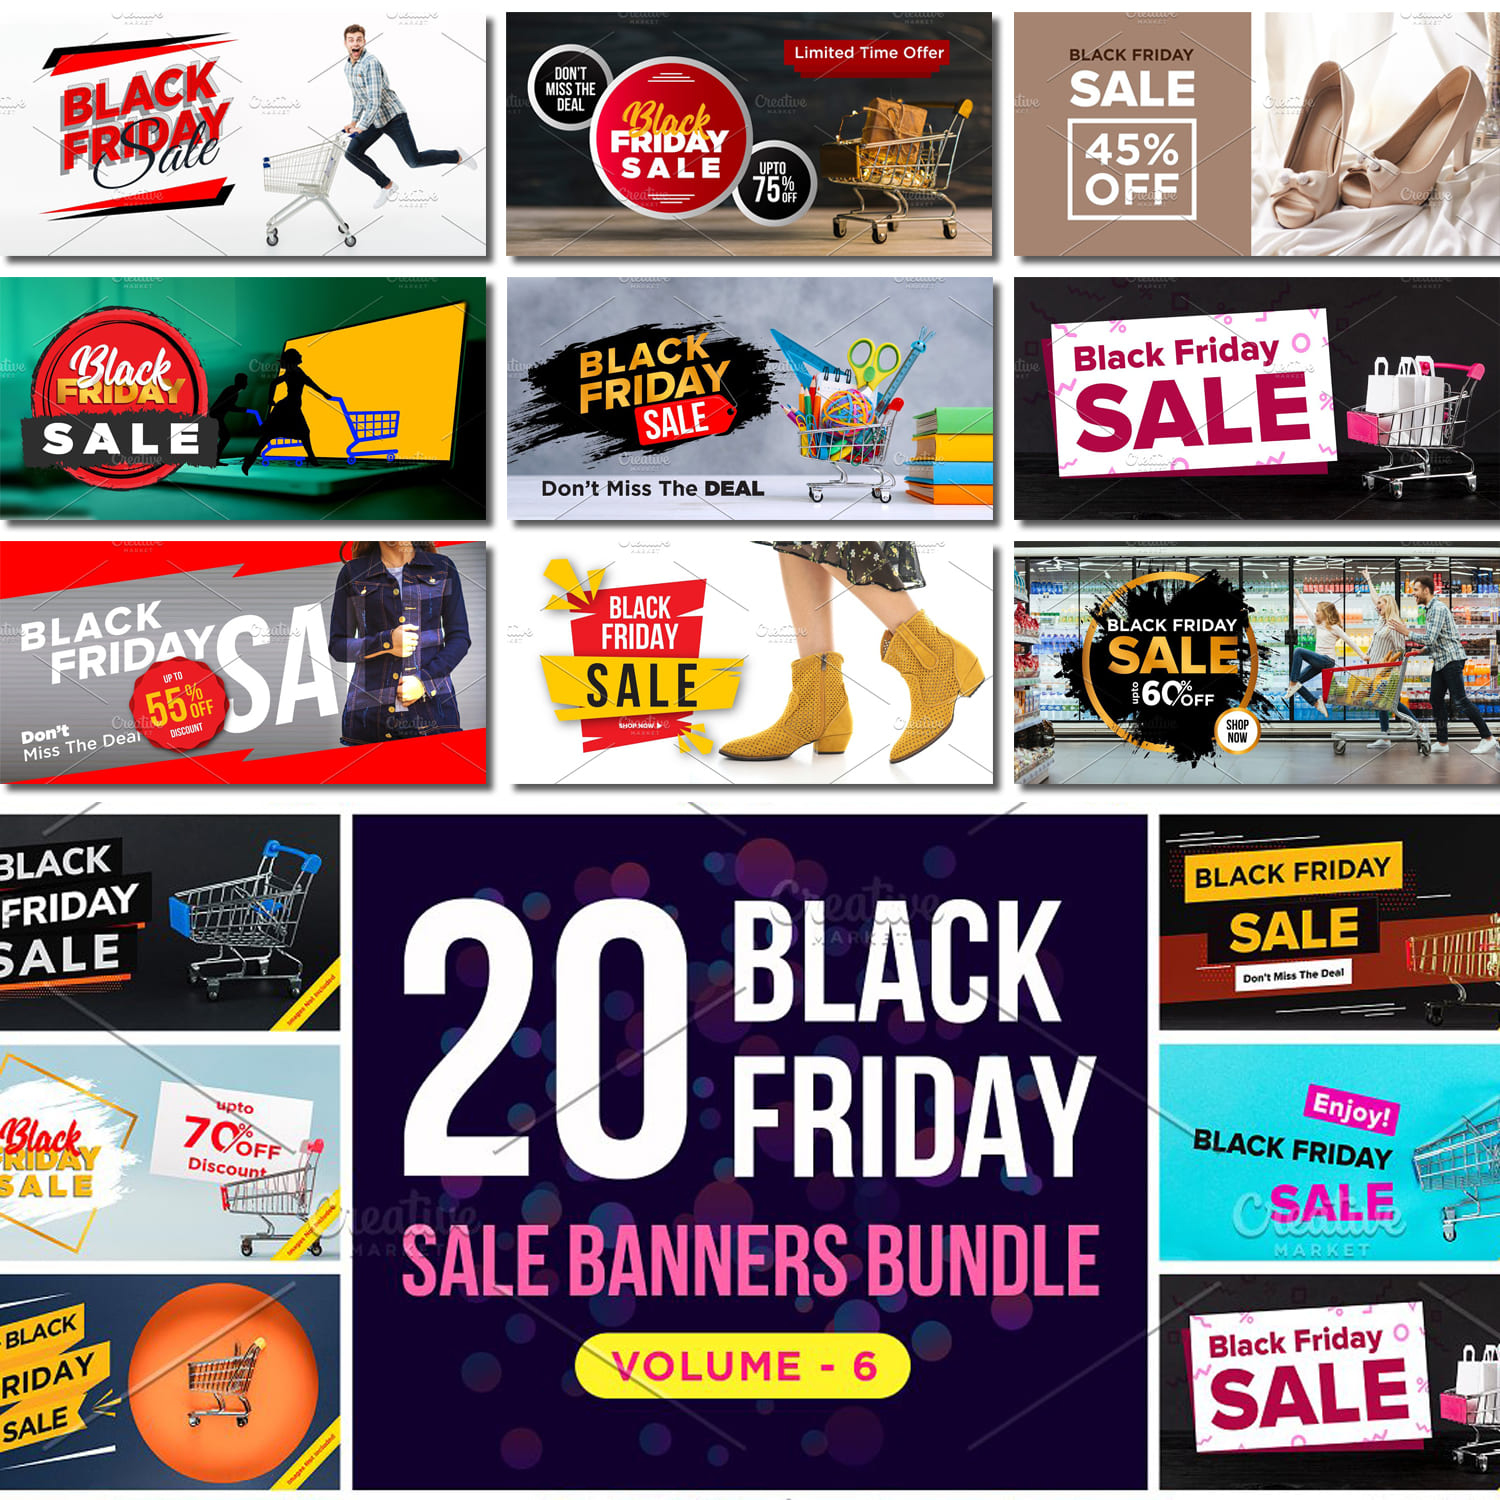 Black Friday Sale Banners created by shahsoft.